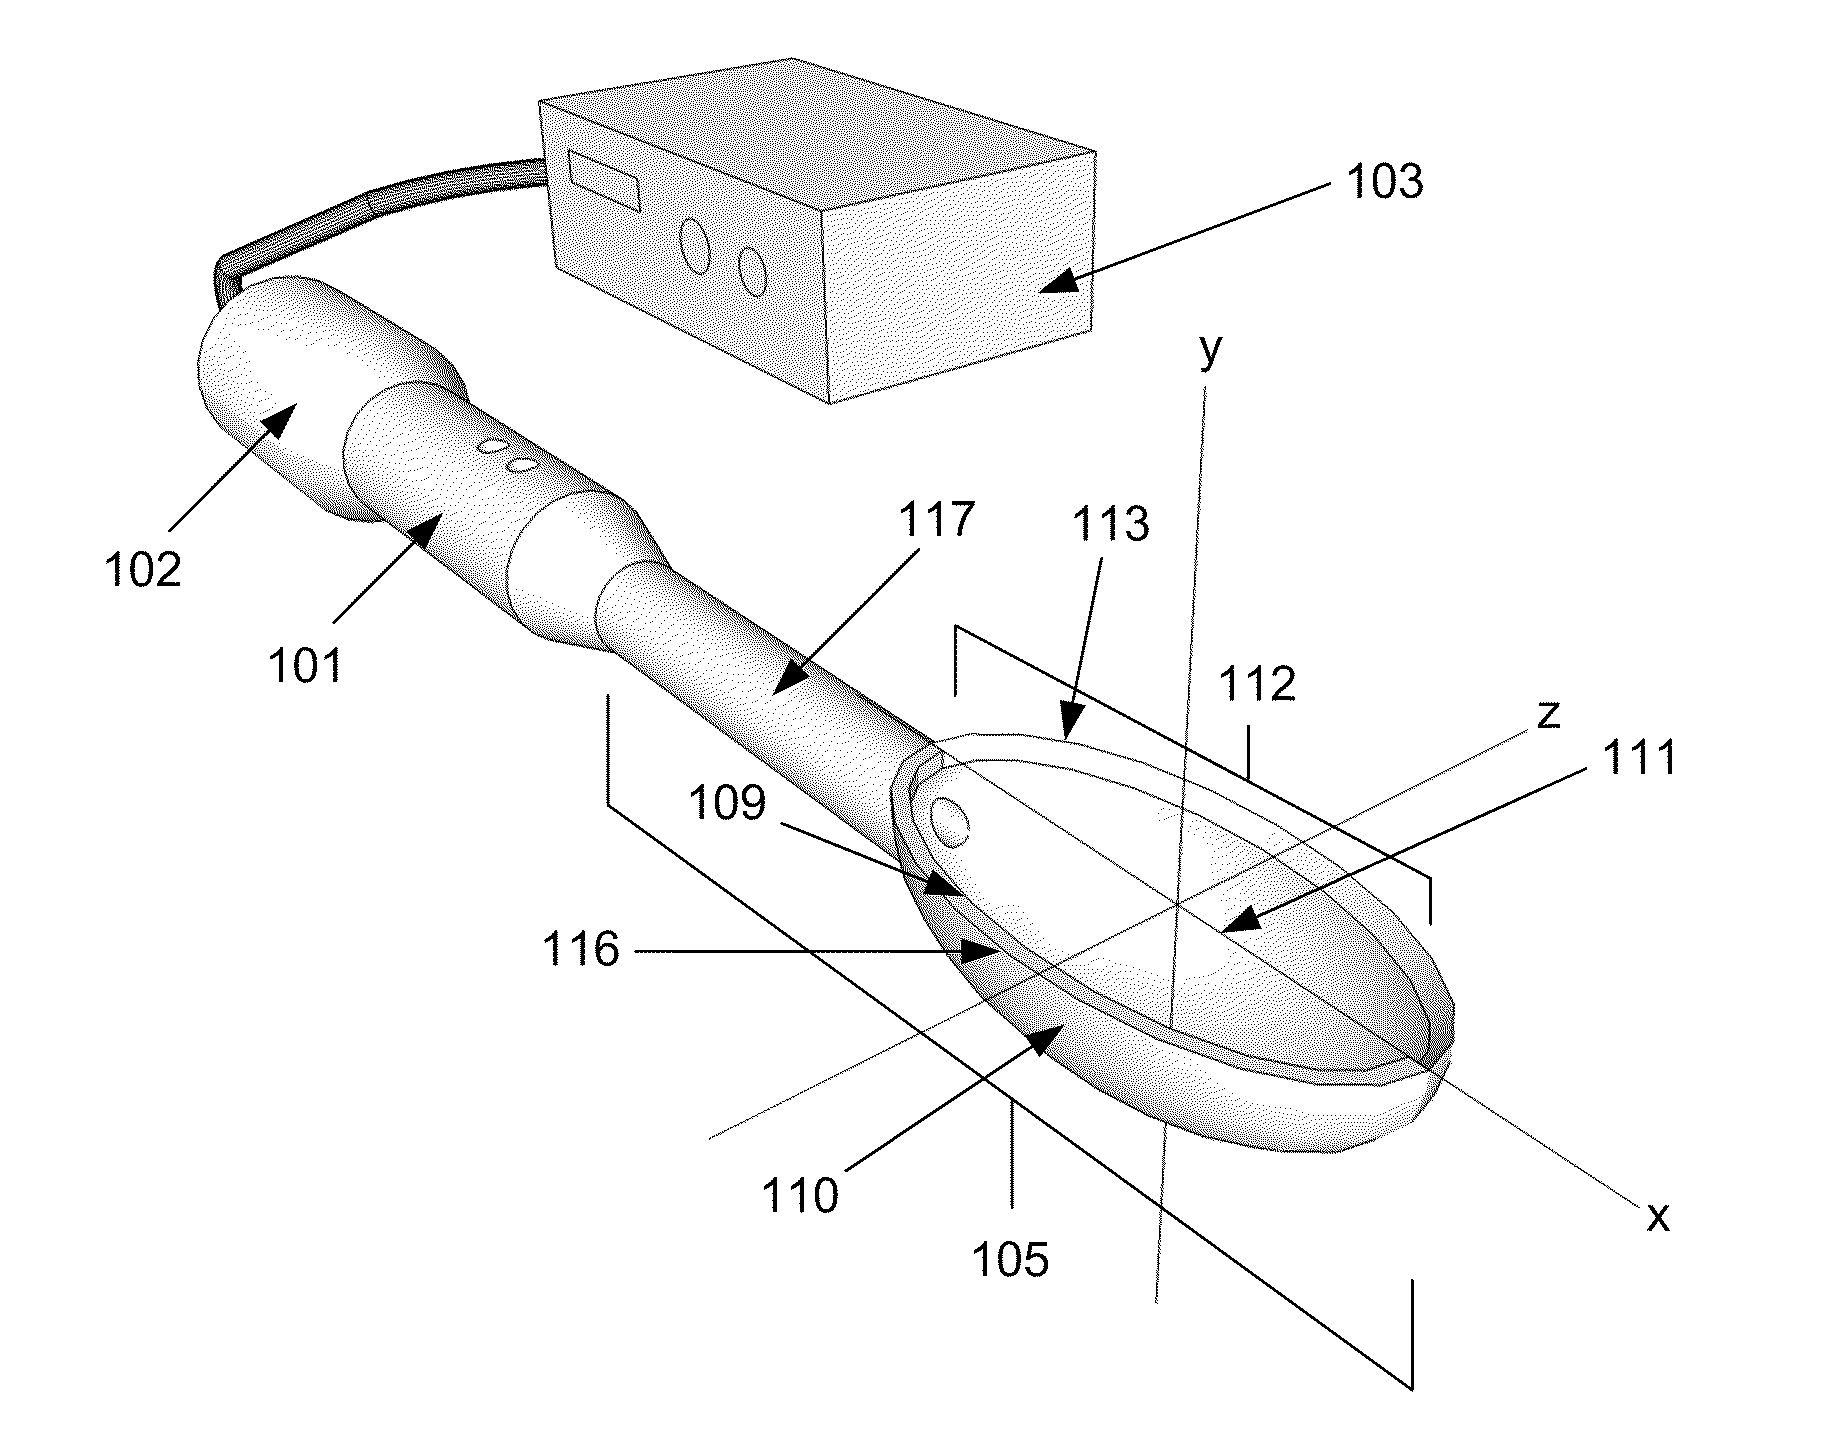 Apparatus for creating a therapeutic solution and debridement with ultrasound energy